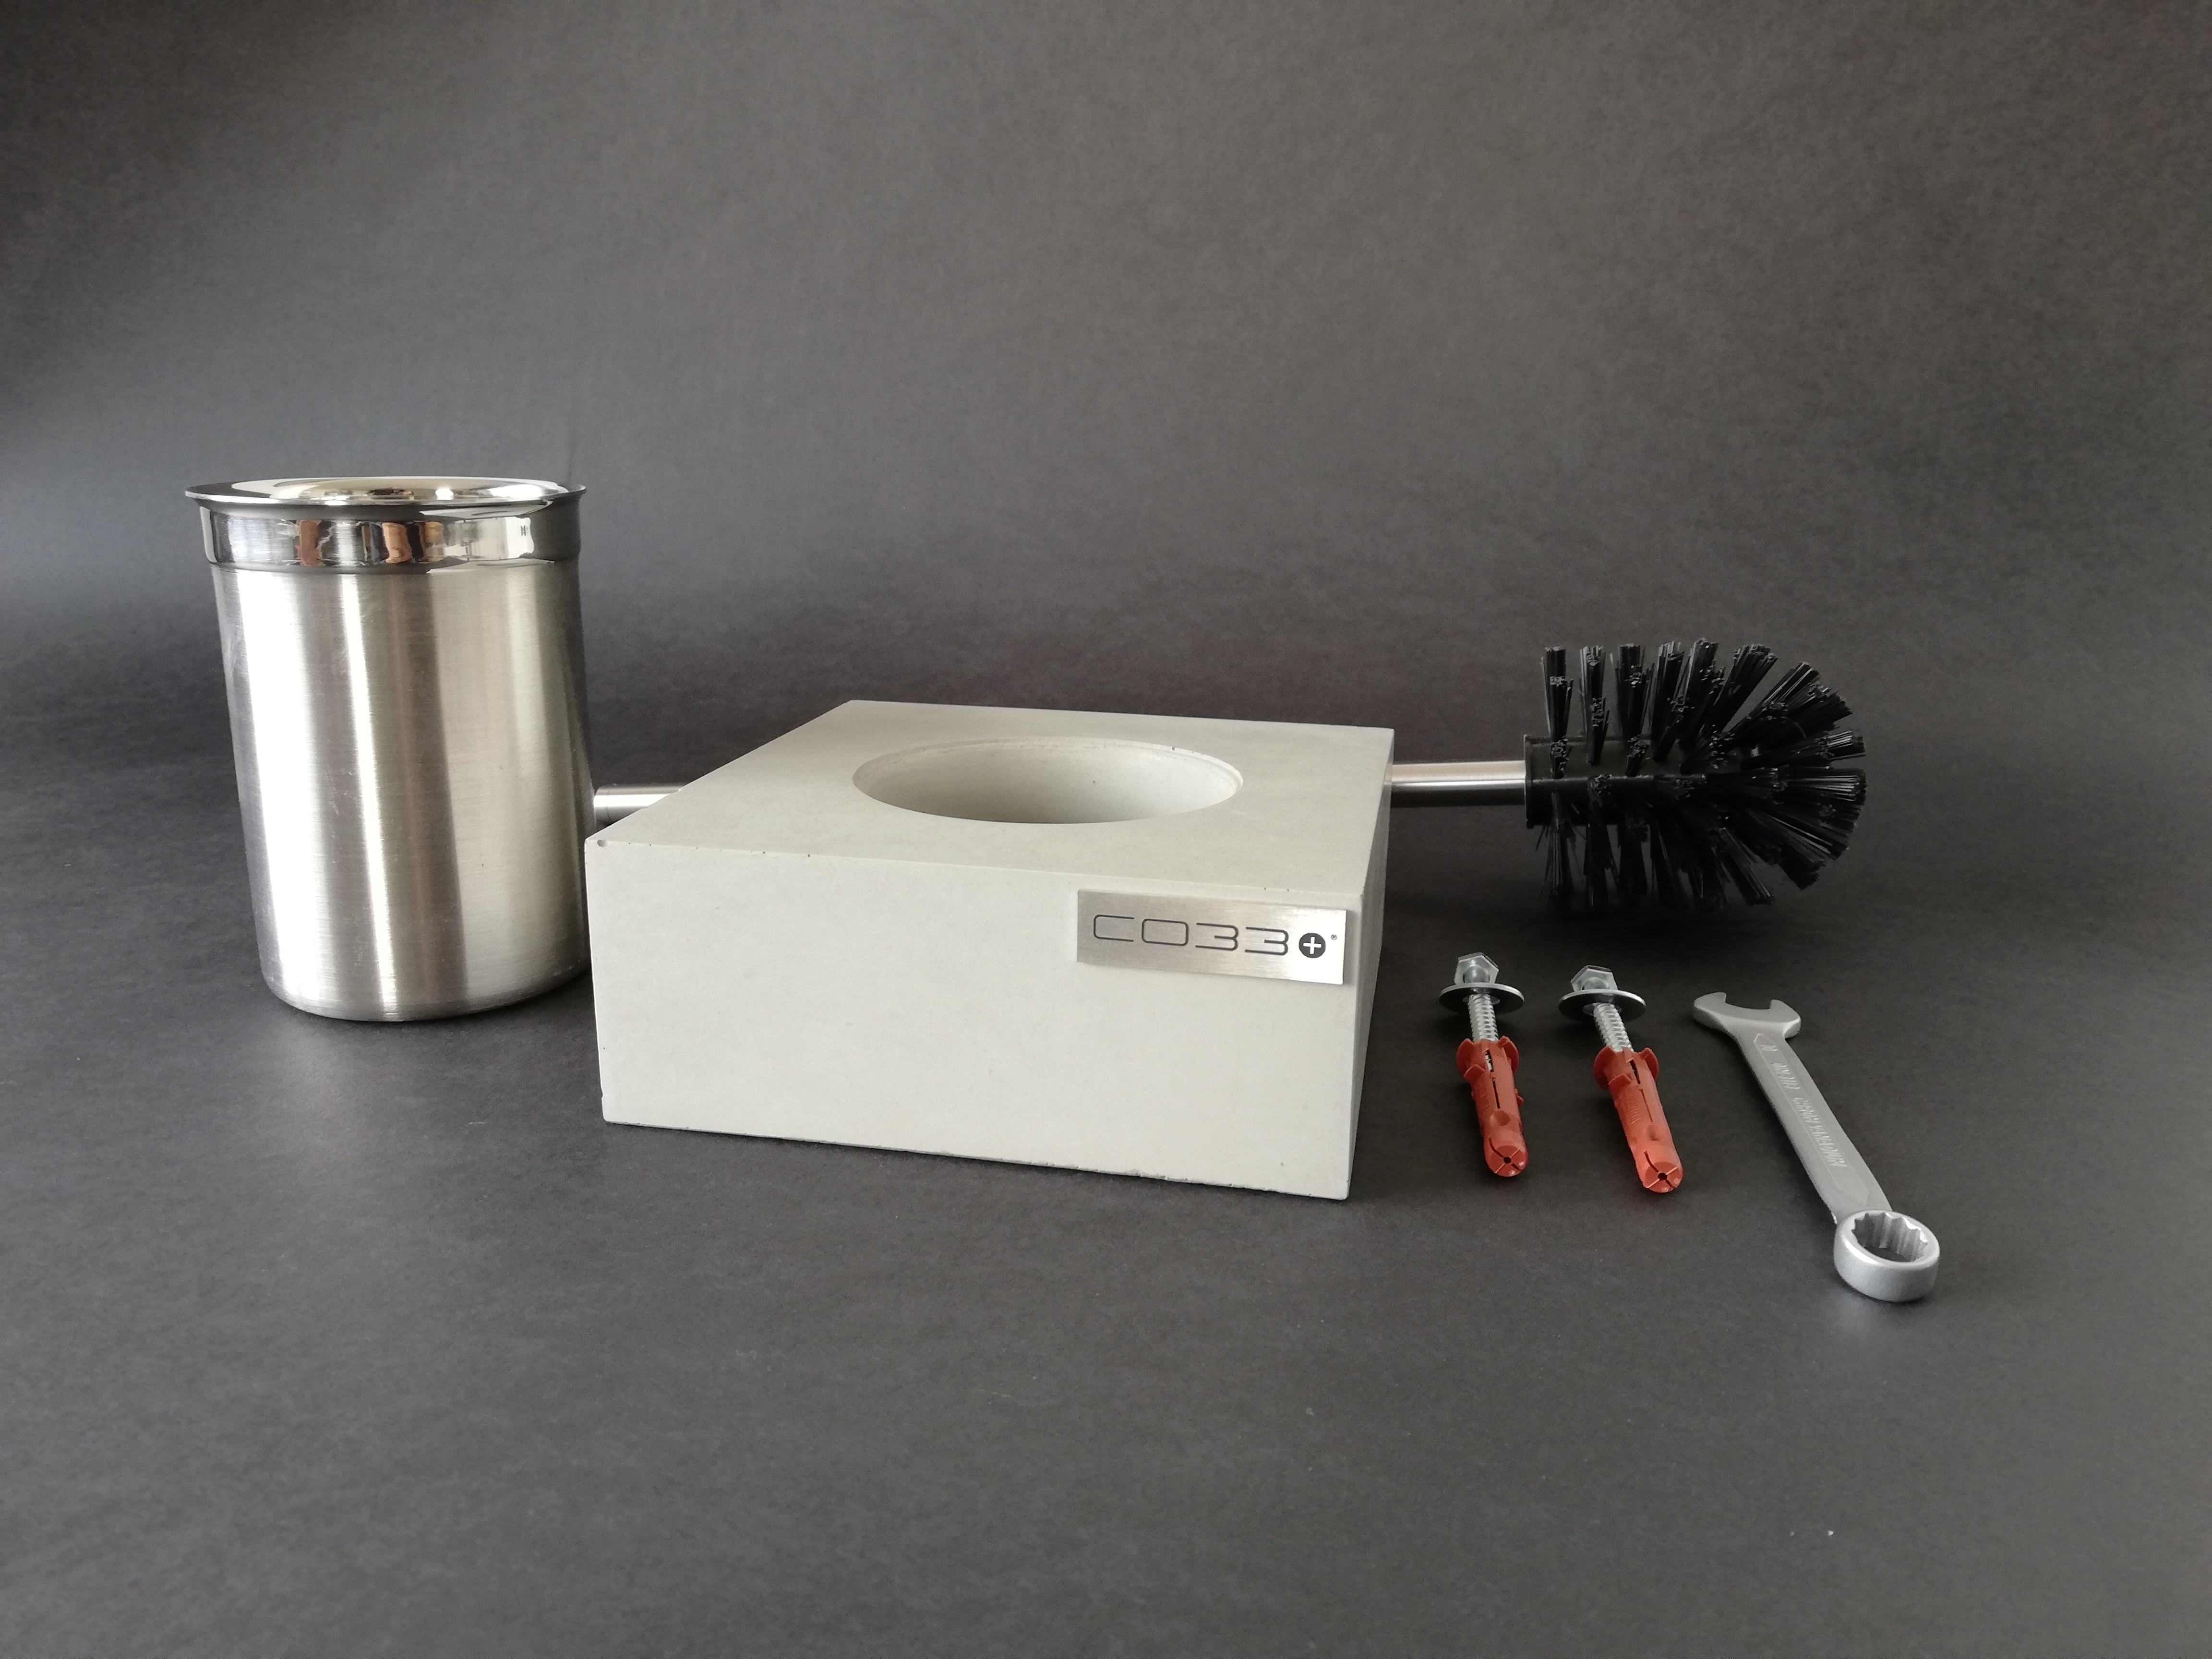 Concrete WC Brush Holder - scope of delivery with mounting kit for wall installation